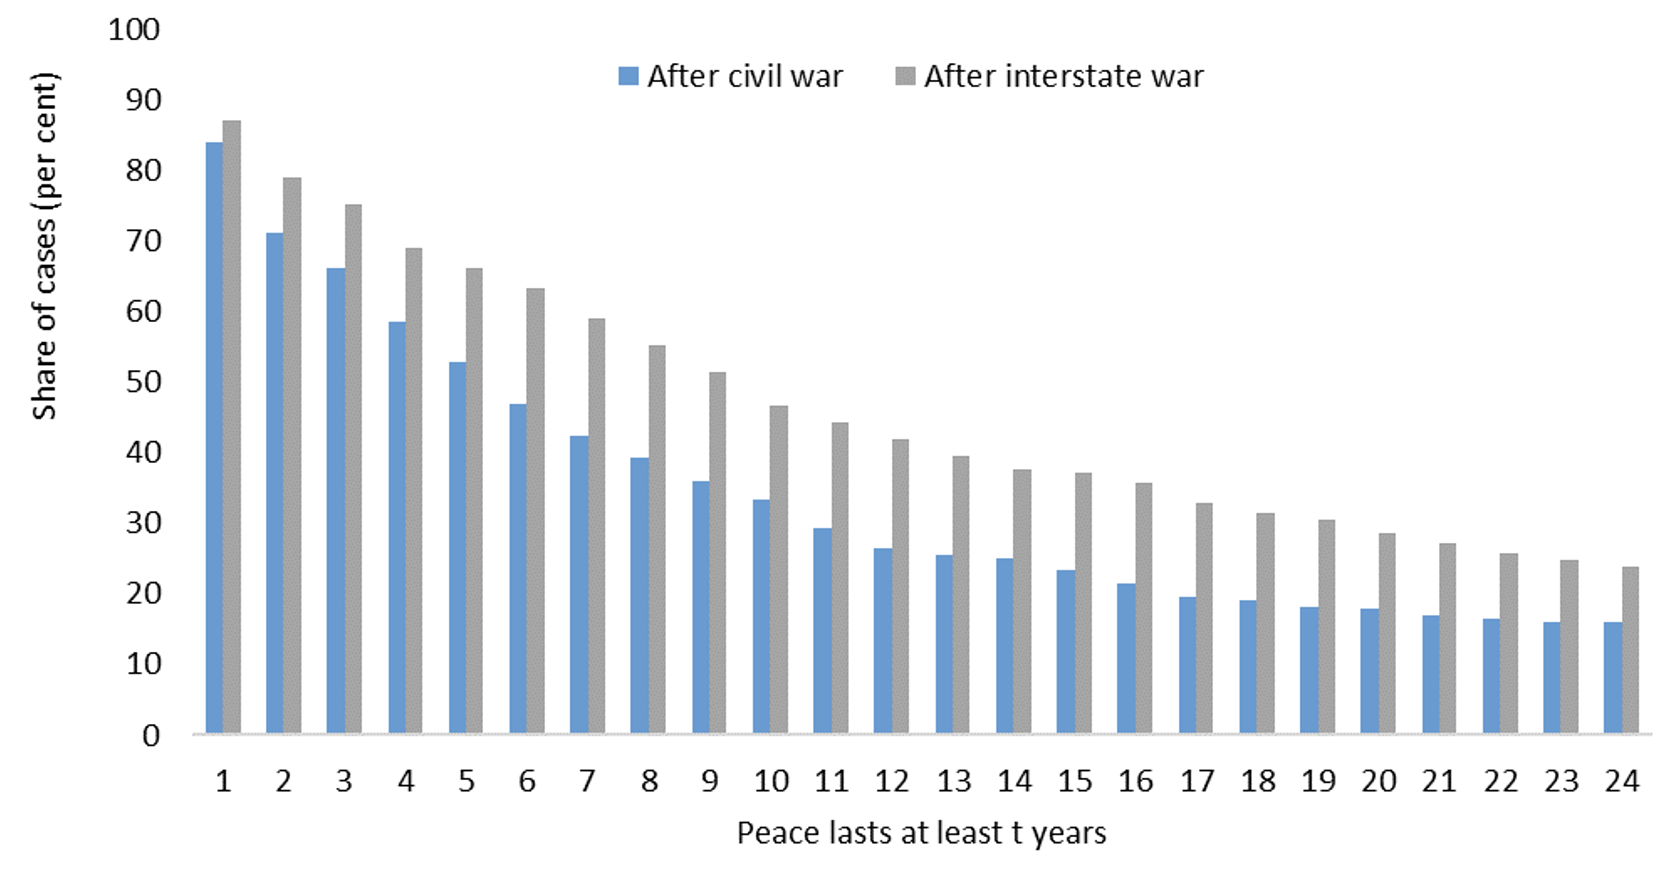 Figure 4 Only around 20% of wars are followed by at least 25 years of peace